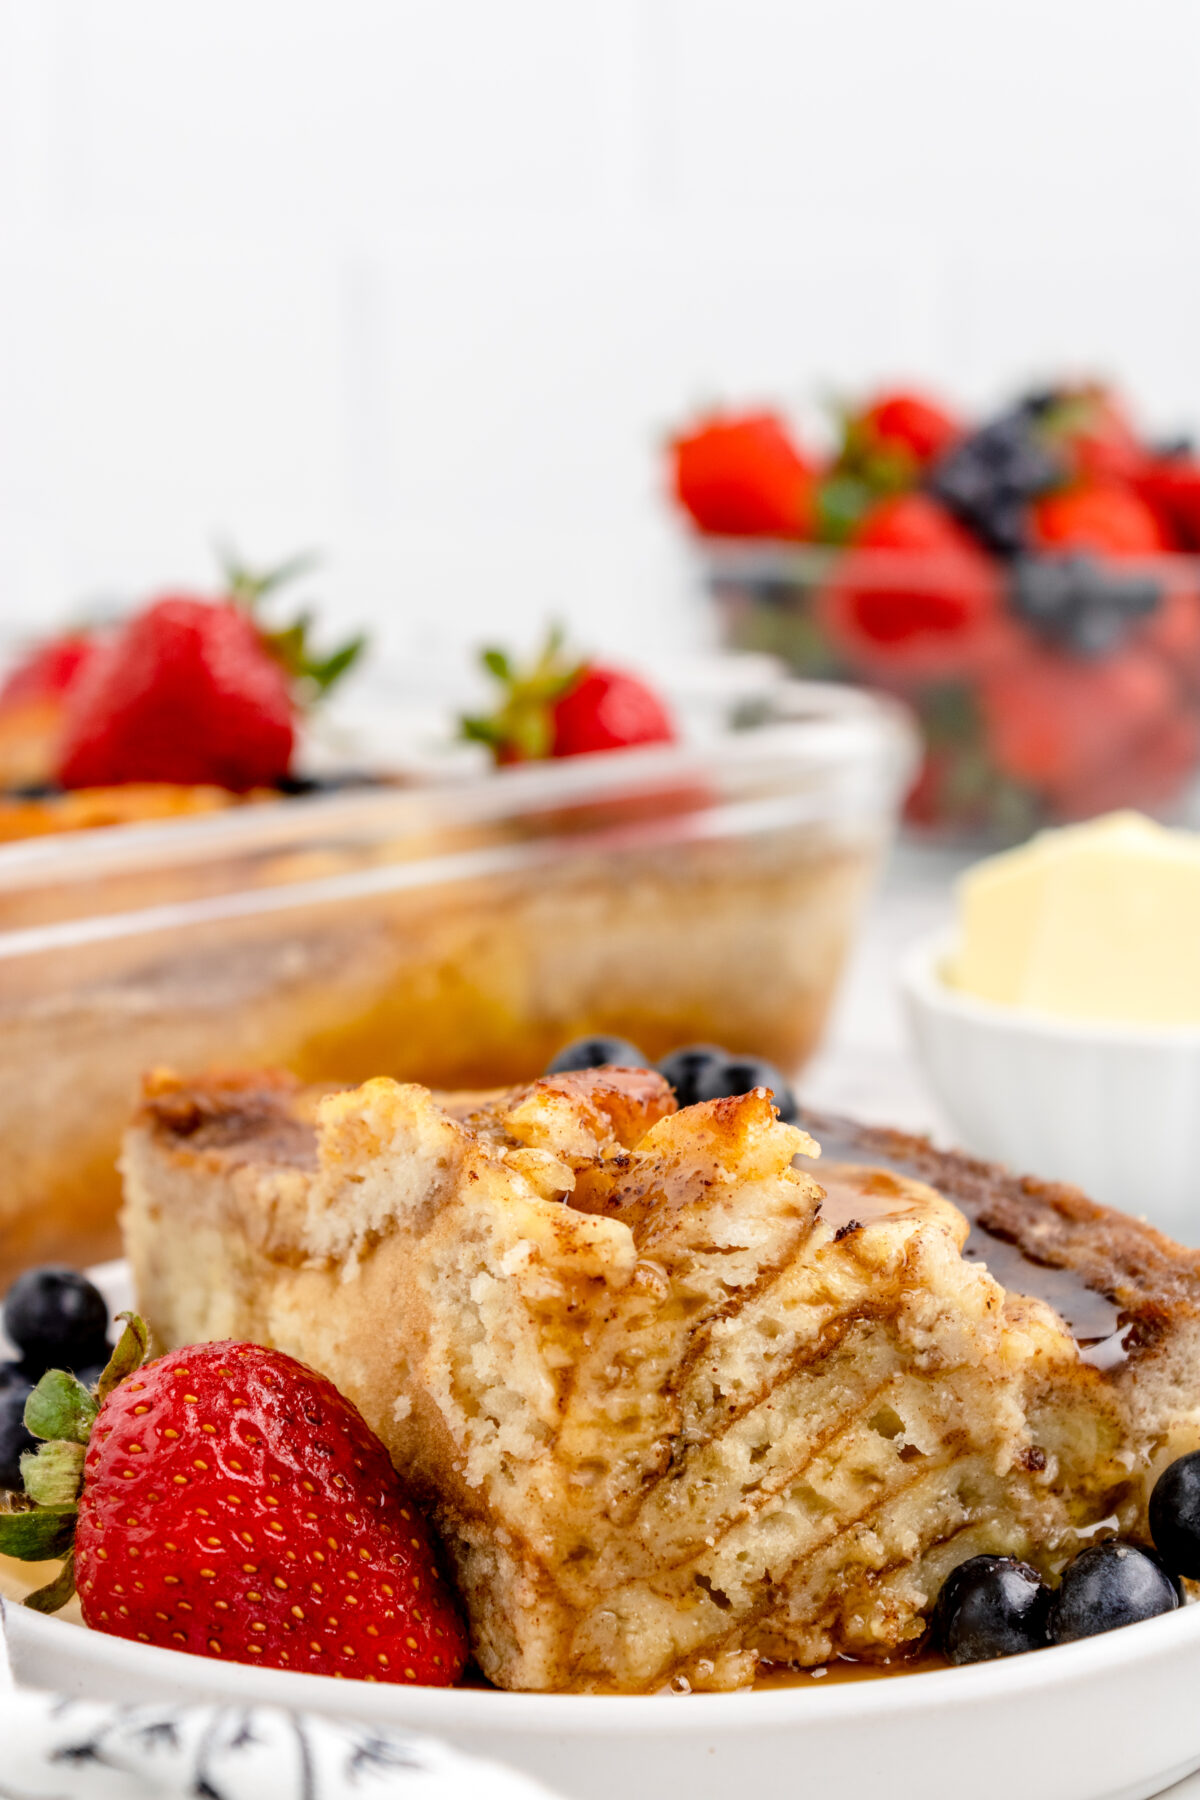 Try out our irresistible pancake casserole recipe and start your morning off right! Perfect for lazy weekends and special occasion brunches!